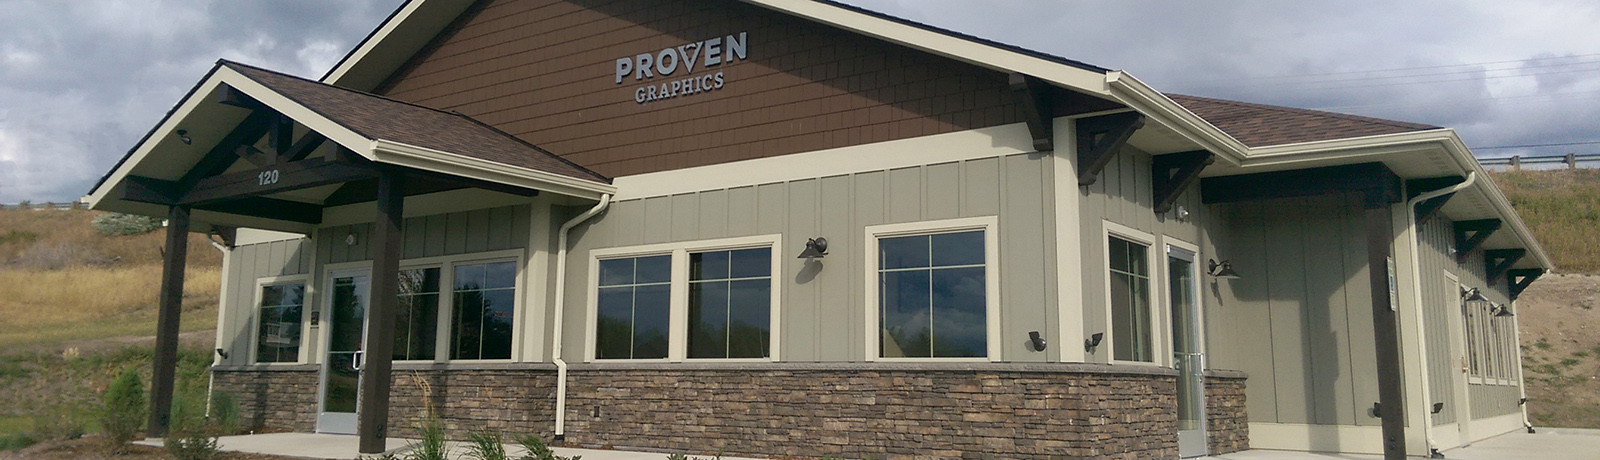 Proven Graphics Office